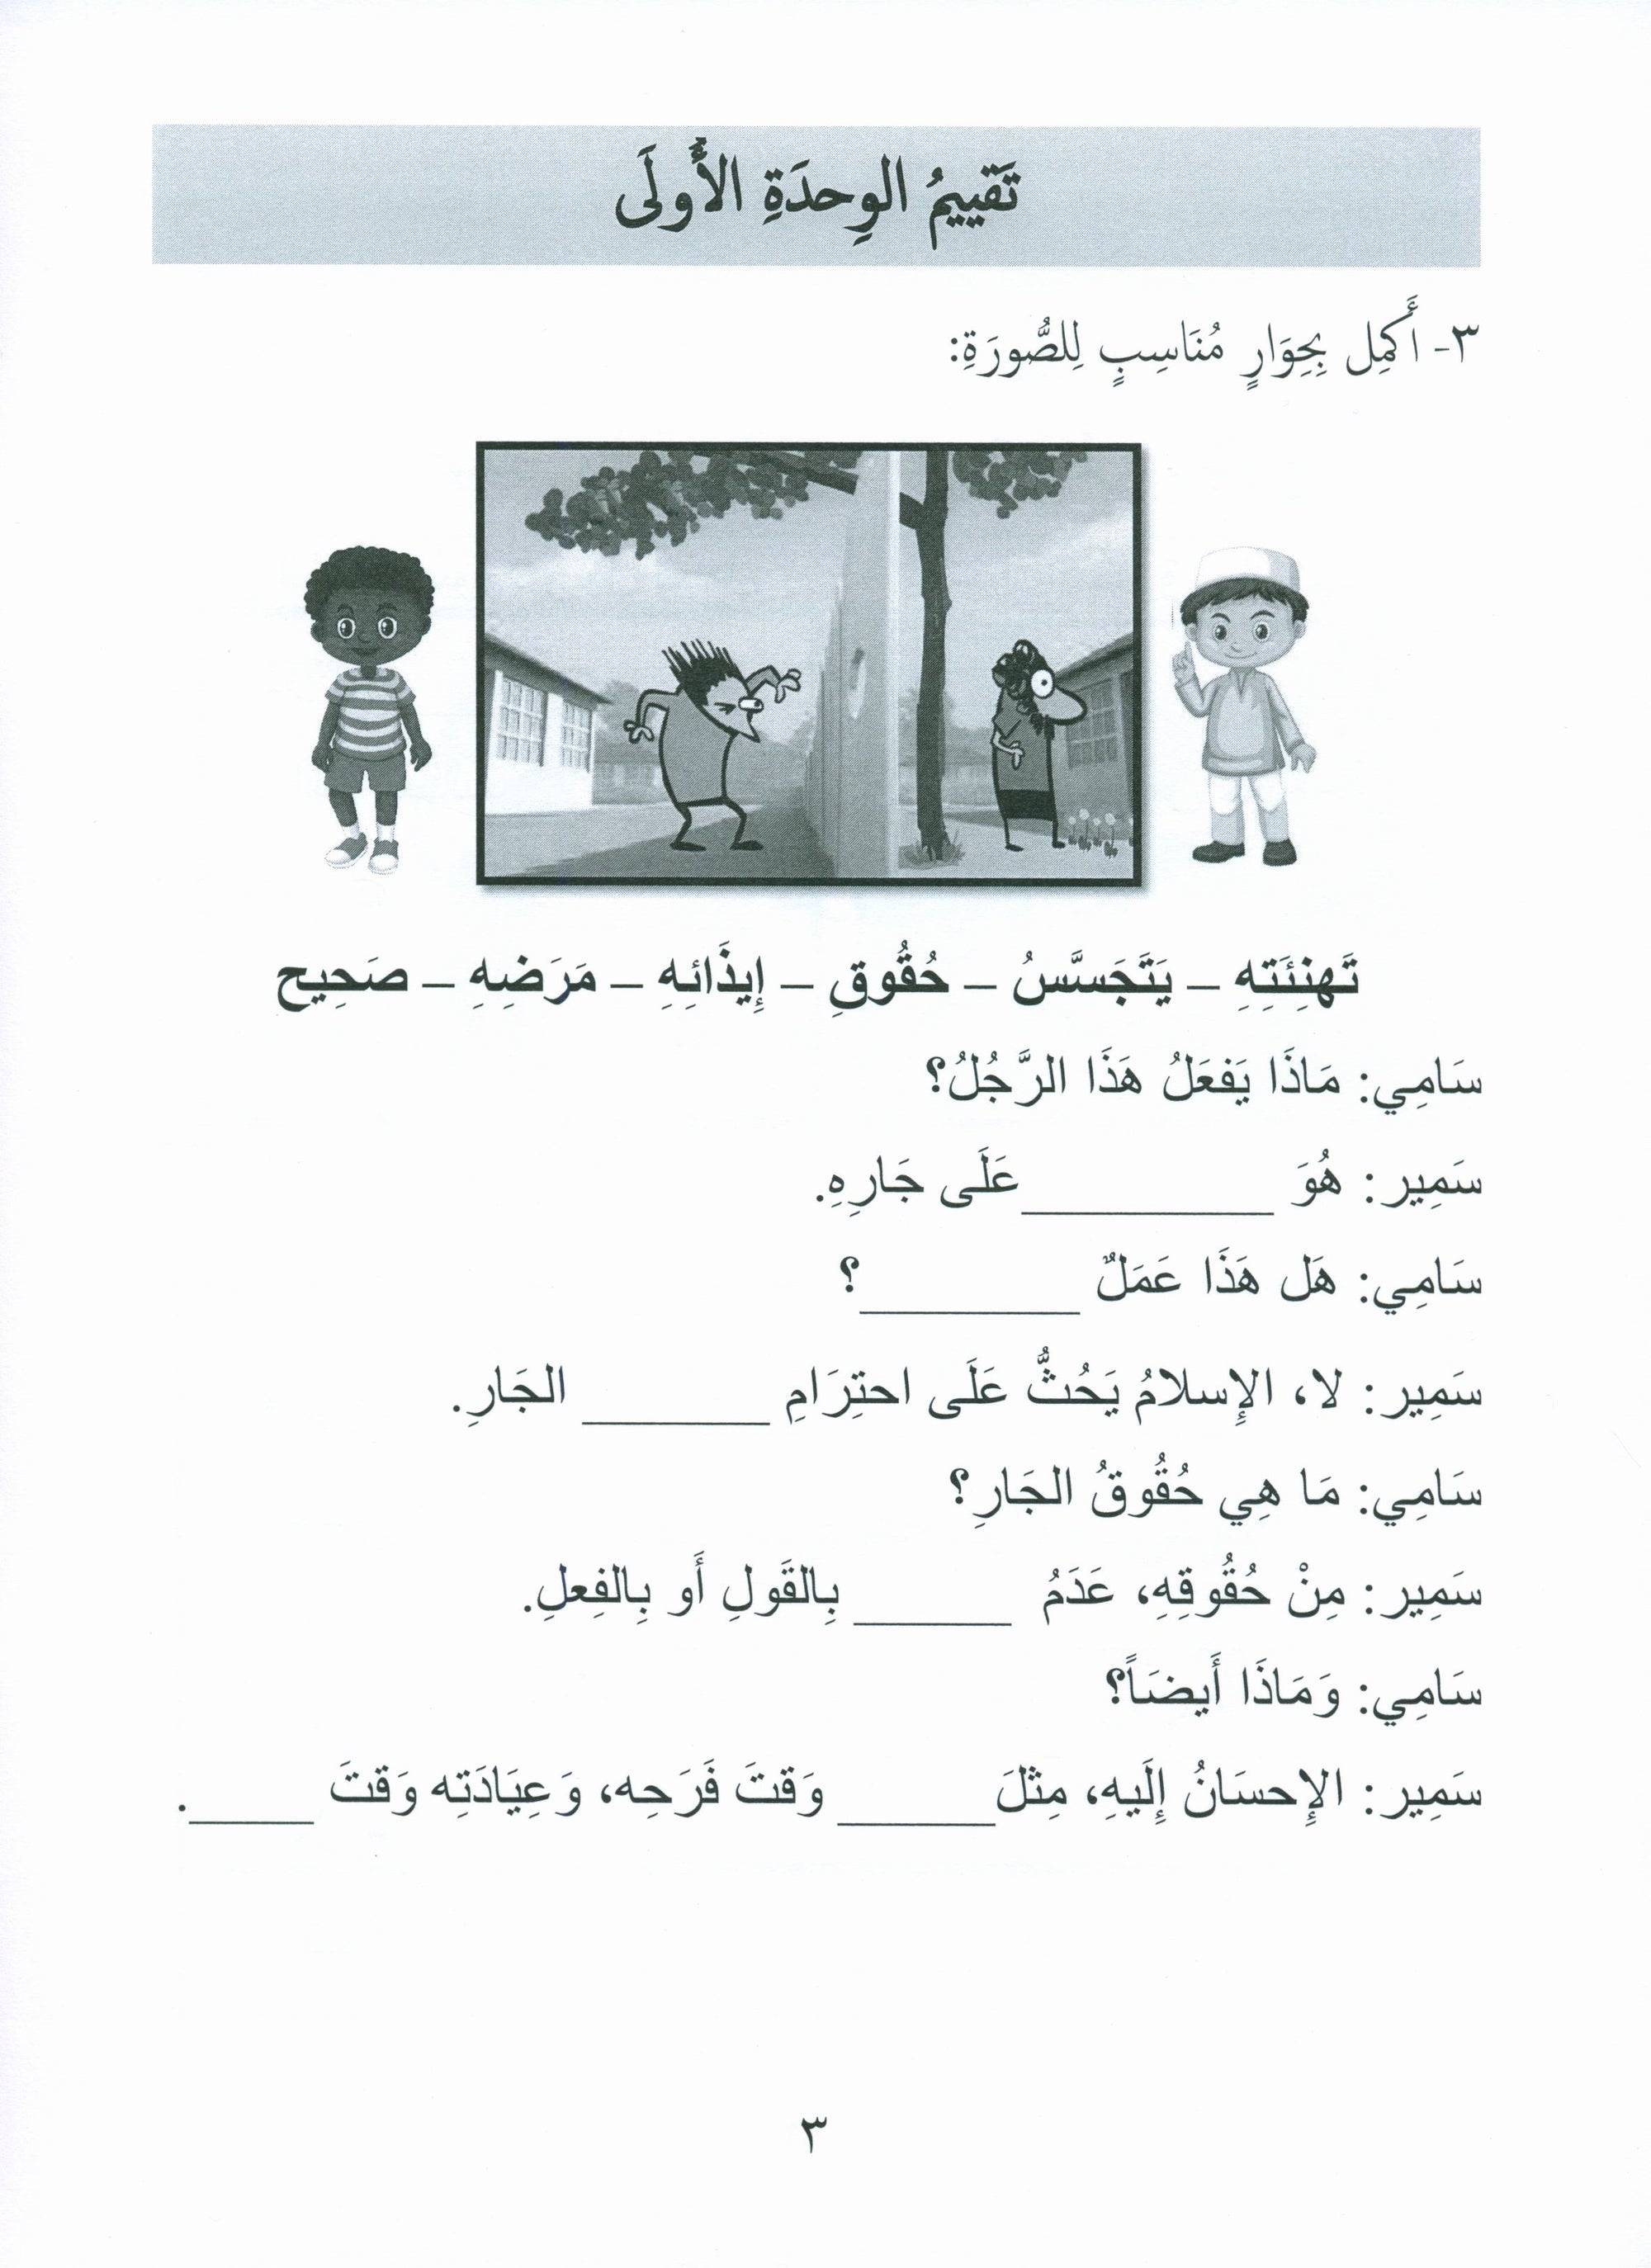 Our Language Is Our Pride Assessment Level 4 لغتنا فخرنا